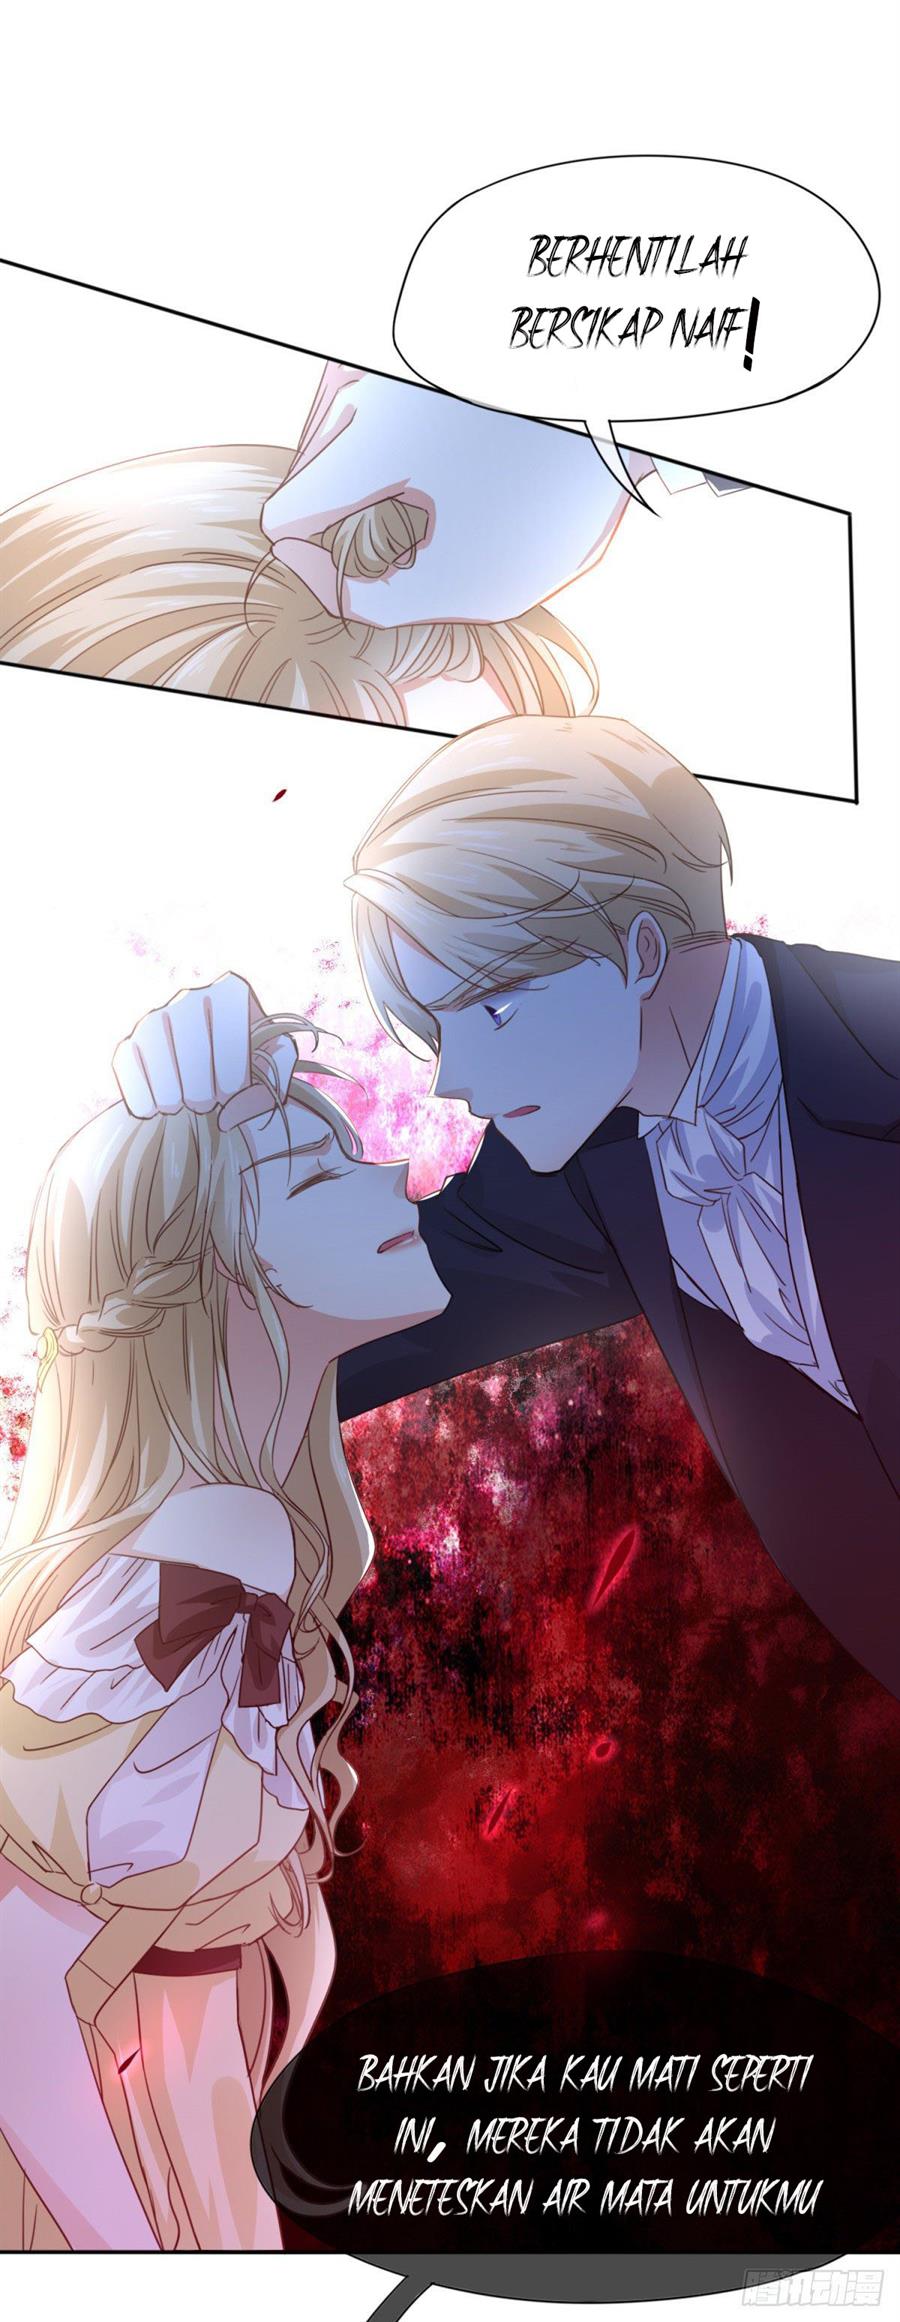 The King’s Beloved Daughter Chapter 1